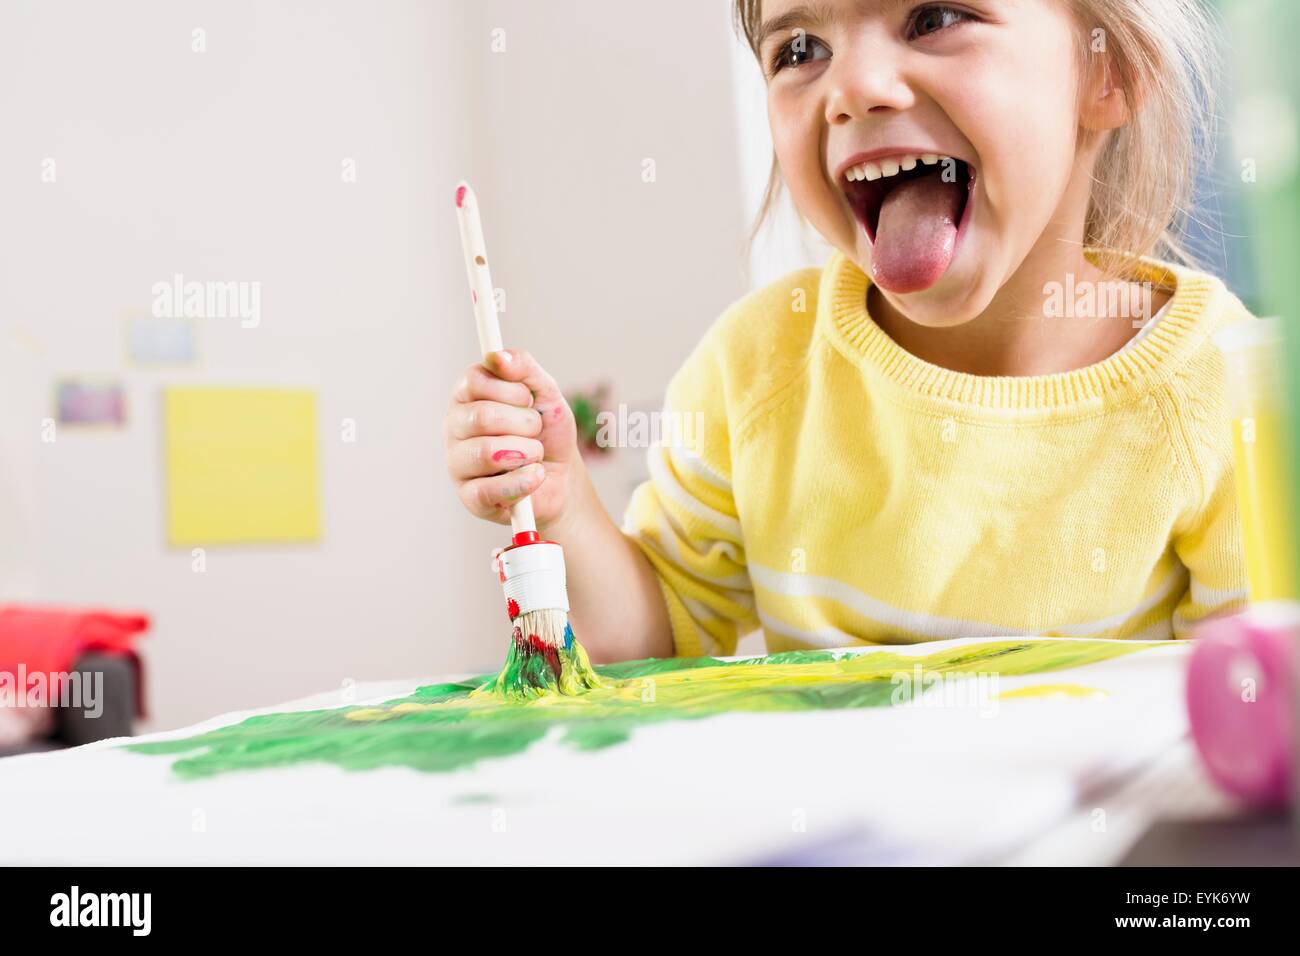 Girl painting and sticking out tongue Stock Photo